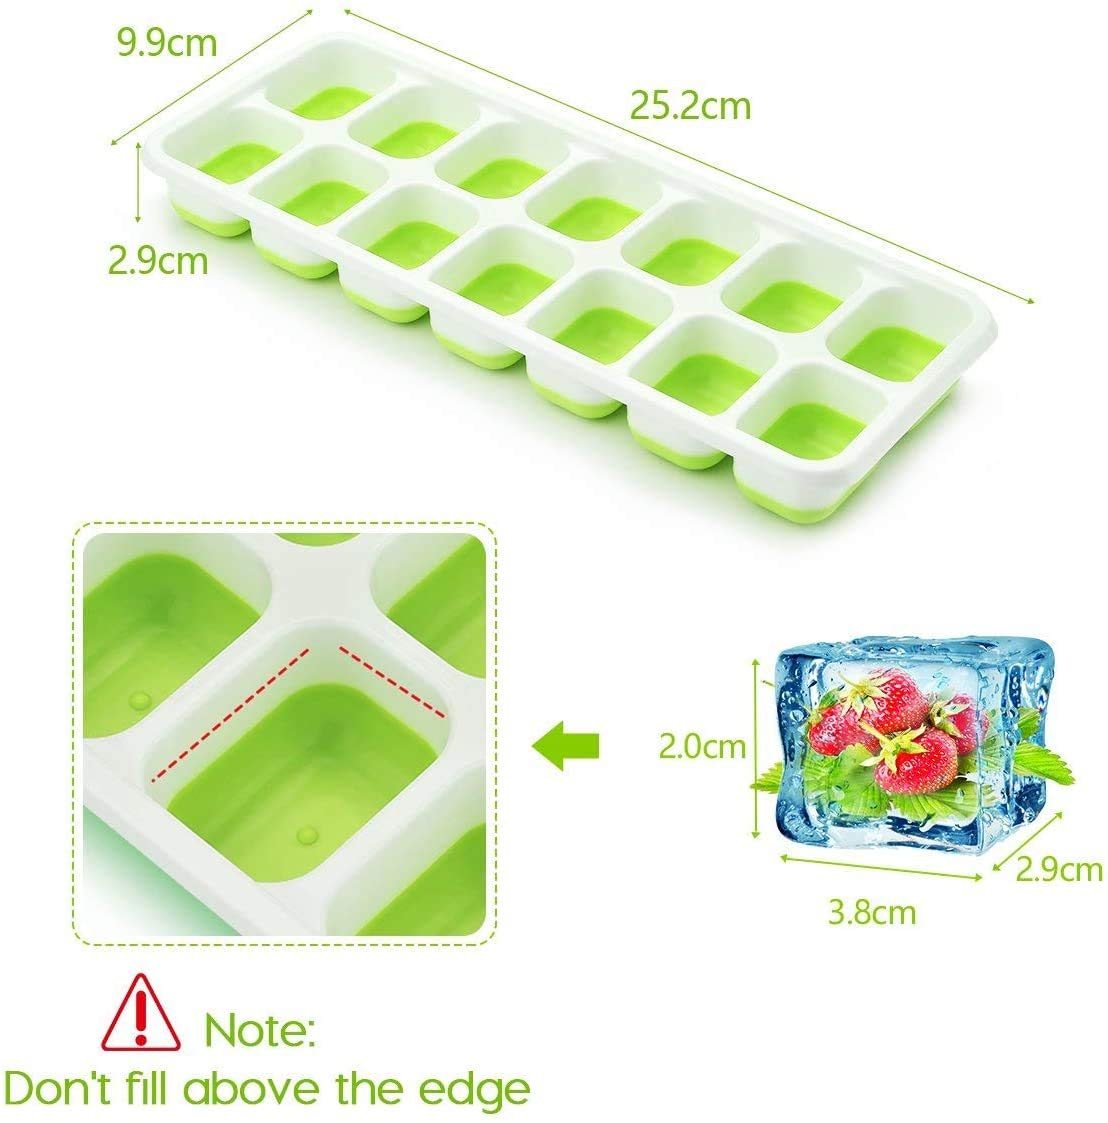 1pc Easy-release Flexible 14-ice Trays With Spill-resistant